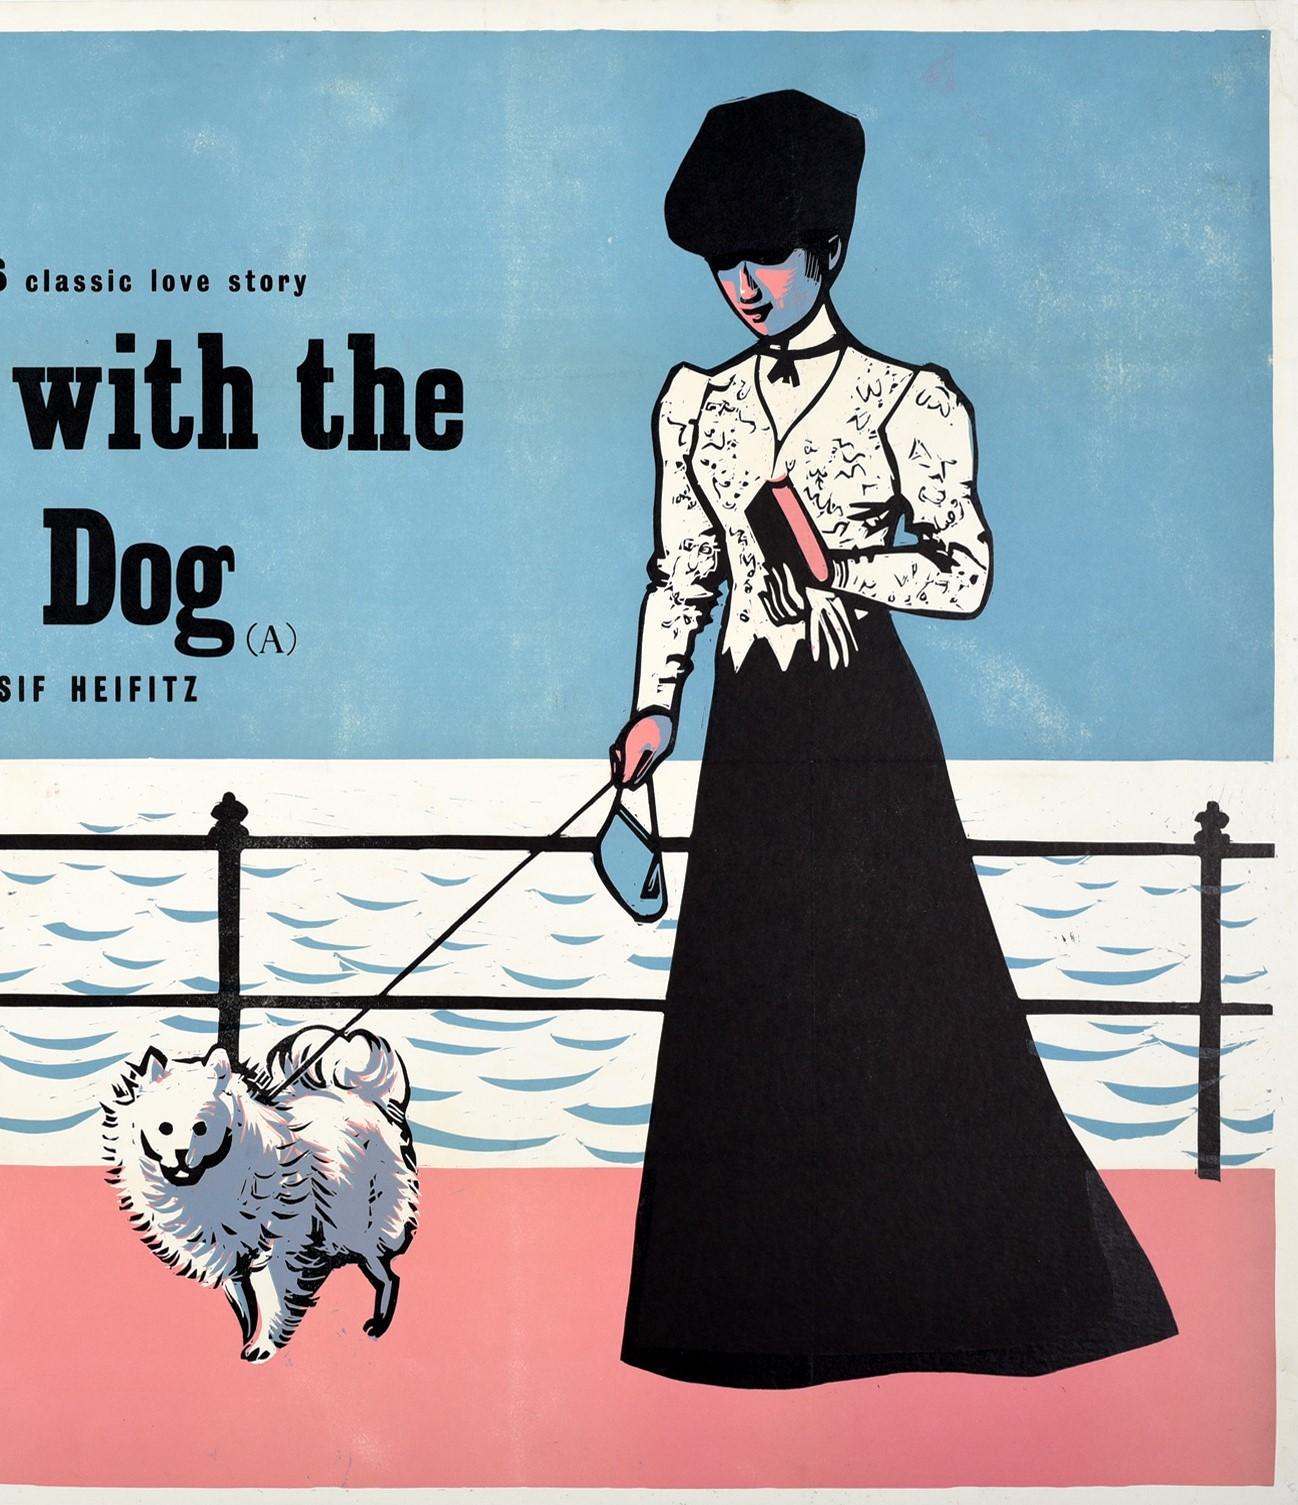 Original vintage movie poster for the UK release of the romantic drama film directed by Iosif Kheifits - The Lady With The Dog - inspired by the classic love story by the renowned Russian writer Anton Chekov about an adulterous affair between Dmitri